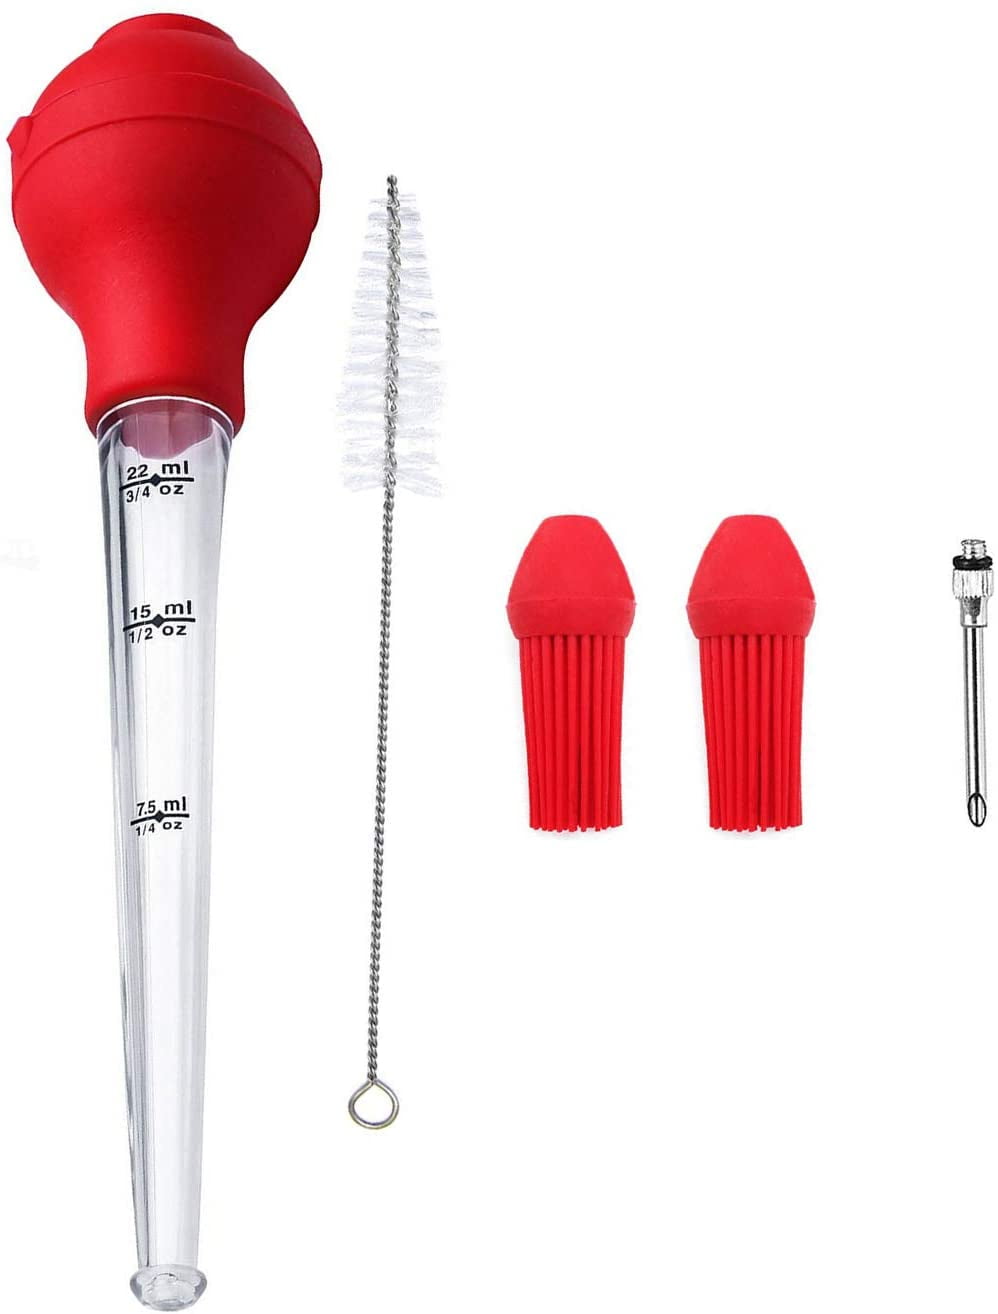 Pork,Fish Beef Perfect for Basting and Marinating Turkey Meat Marinade Injector Needle with Cleaning Brush A Turkey Baster Barbecue Basting Brush